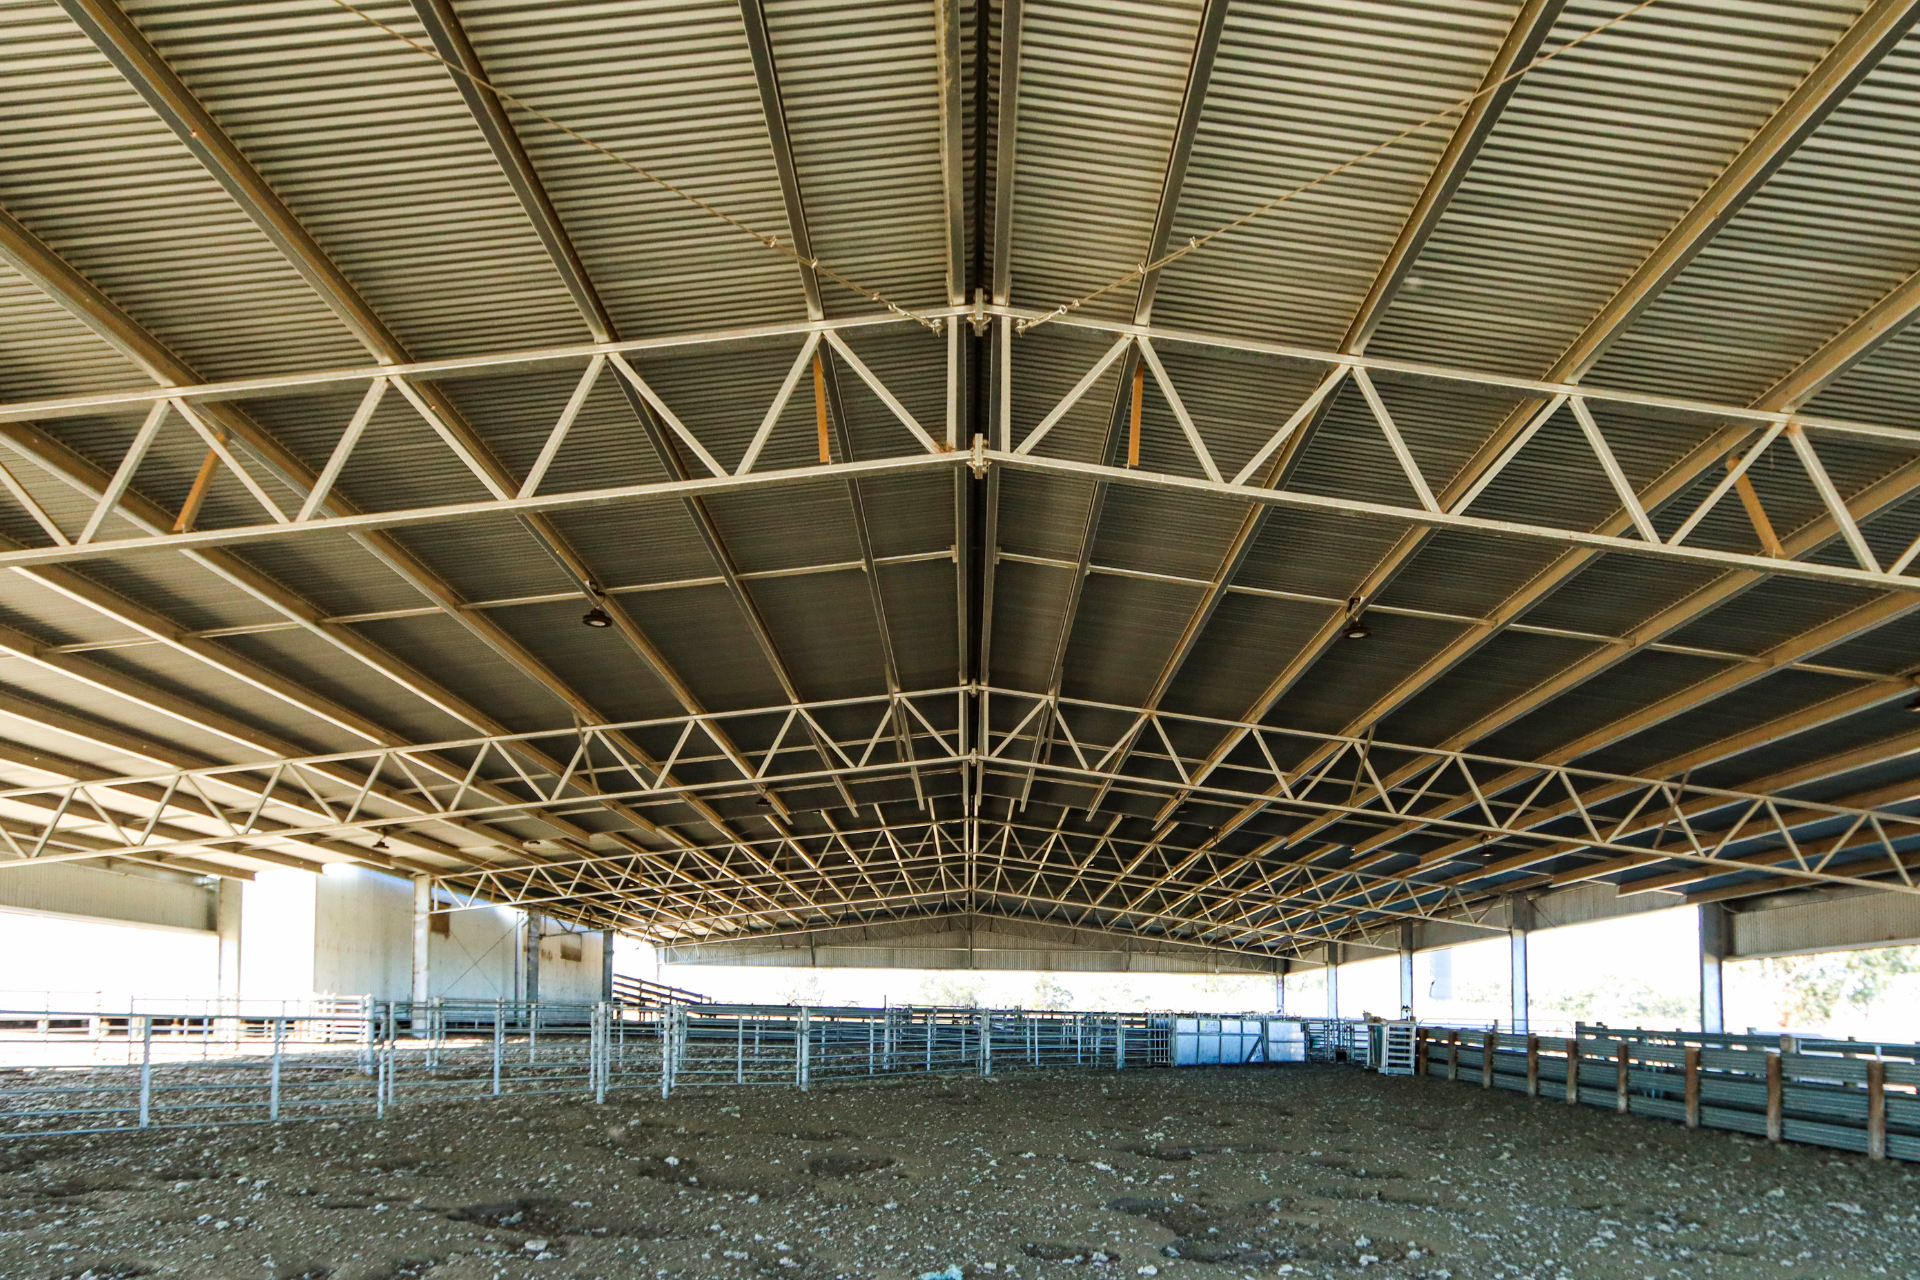 You are currently viewing 56m x 27m x 3.6m sheep yard cover